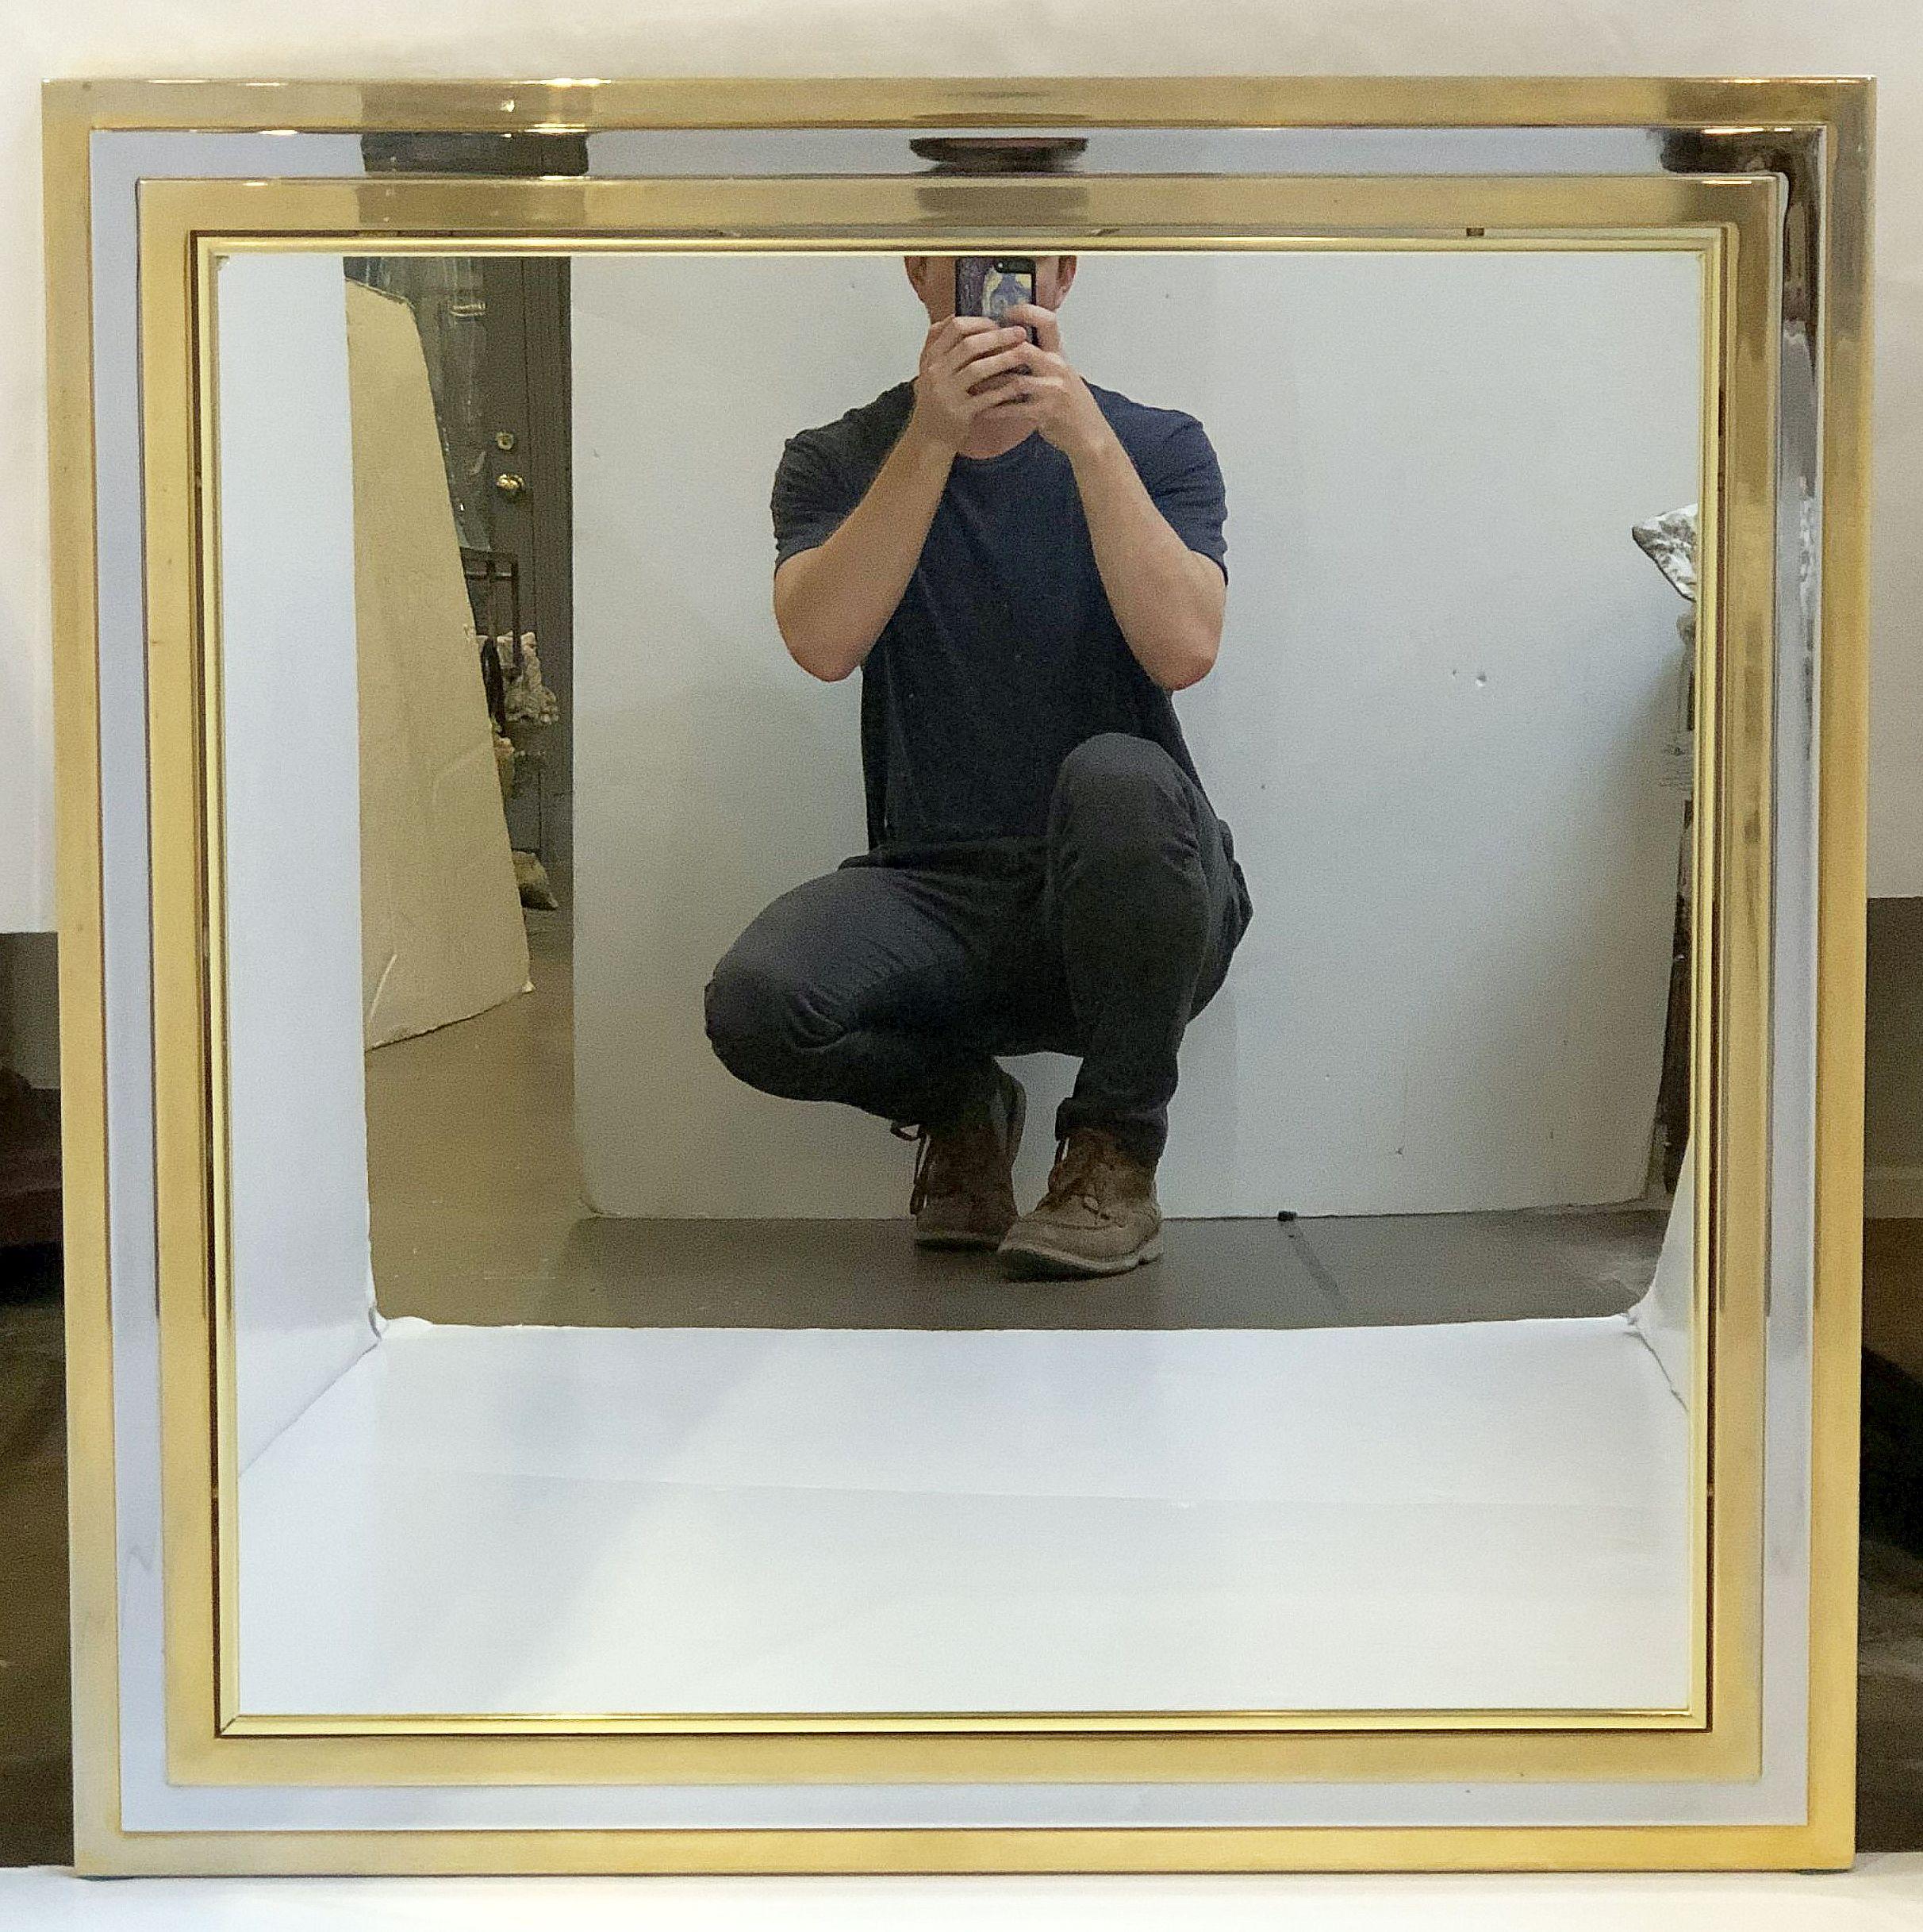 A fine large English square dressing or hall mirror in the Art Deco style featuring a stylish frame of brass and chrome.

Dimensions are H 35 1/2 inches x W 35 1/2 inches